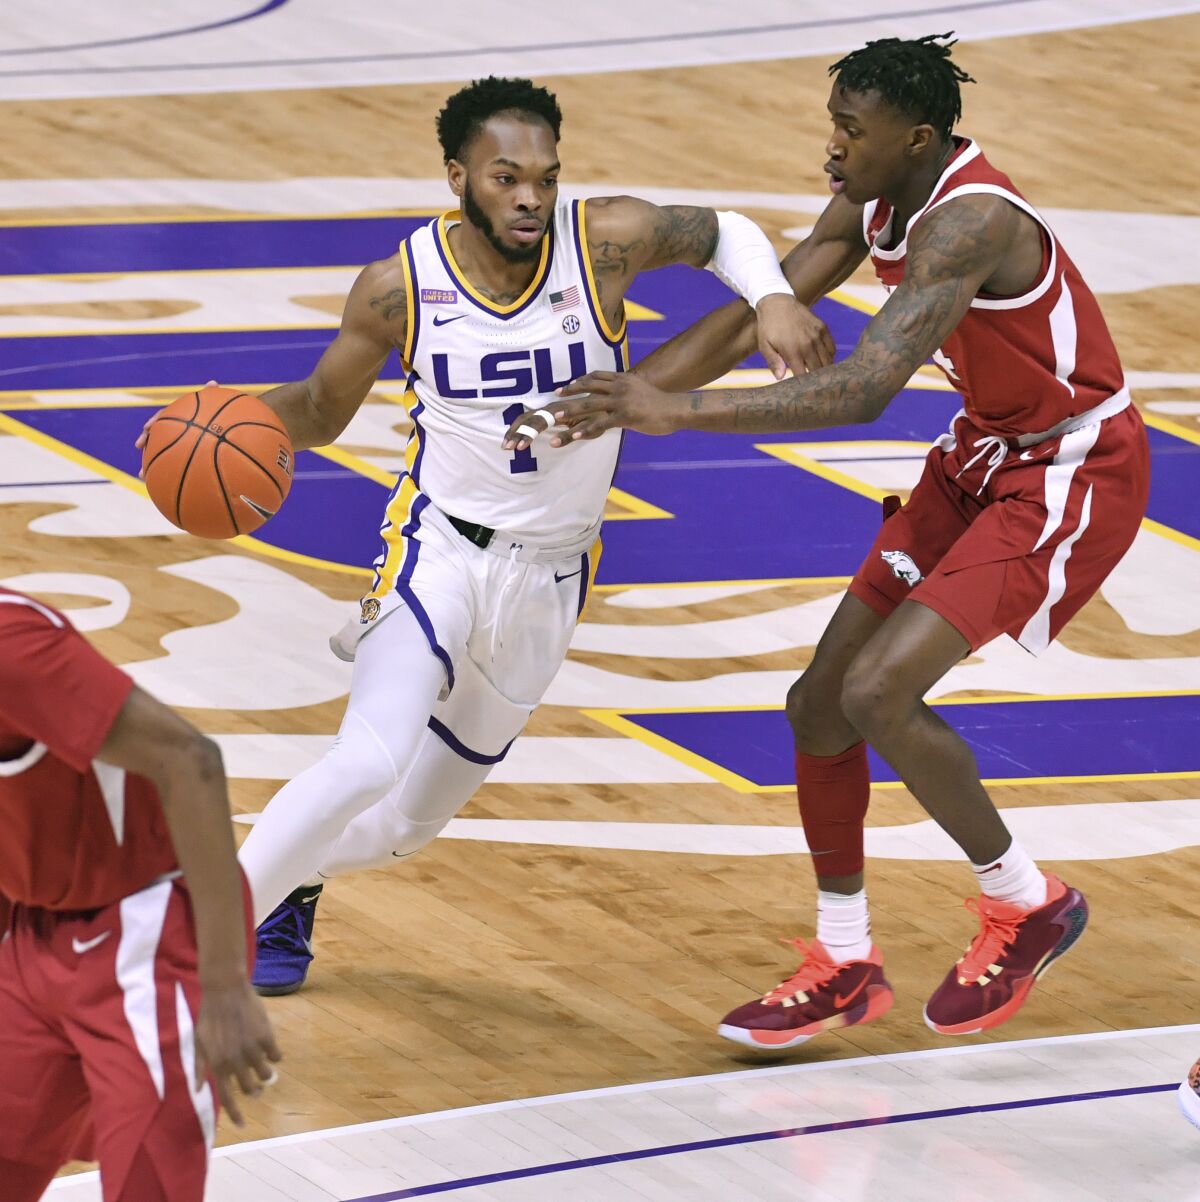 LSU guard Javonte Smart (1) drives past Arkansas guard Davonte Davis (4) during the first half of an NCAA college basketball game Wednesday, Jan. 13, 2021, in Baton Rouge, La. (Hilary Scheinuk/The Advocate via AP)